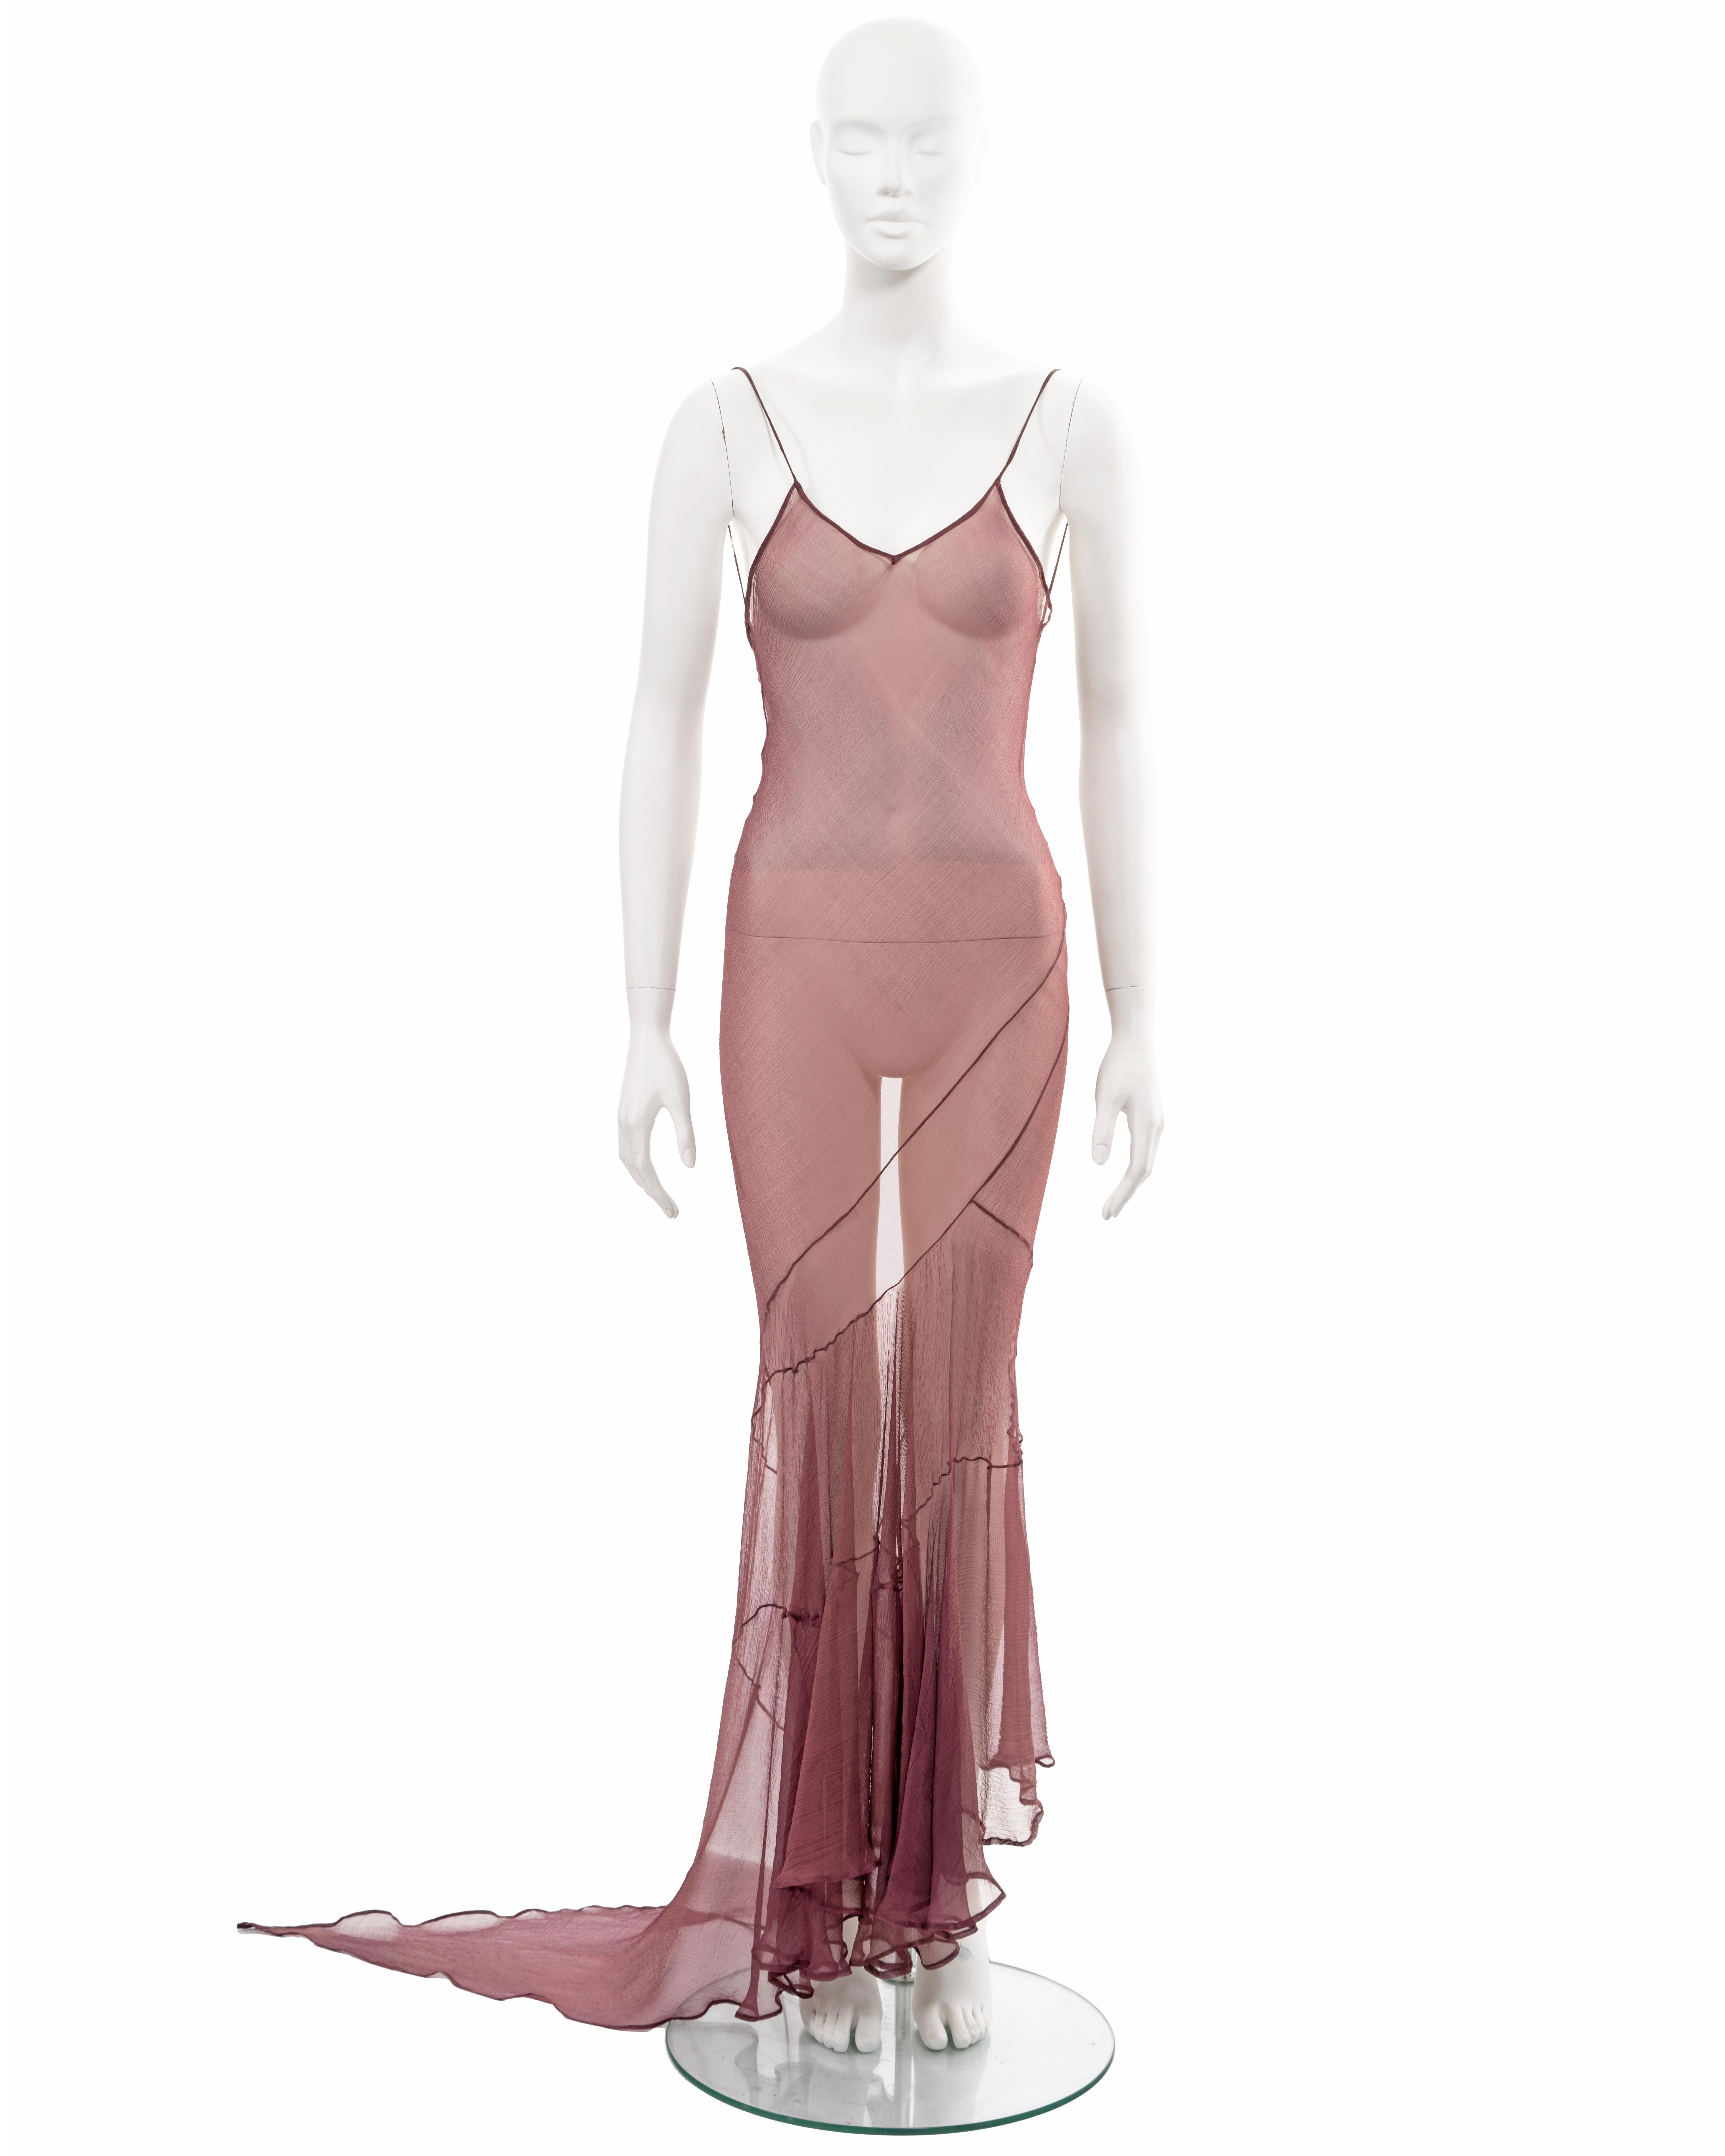 ▪ John Galliano evening slip dress
▪ 'Filibusters', Spring-Summer 1993
▪ Museum Grade
▪ Constructed from maroon bias-cut silk chiffon 
▪ Descending hemline with pointed train 
▪ Spaghetti straps 
▪ Two string ties fasten at the back 
▪